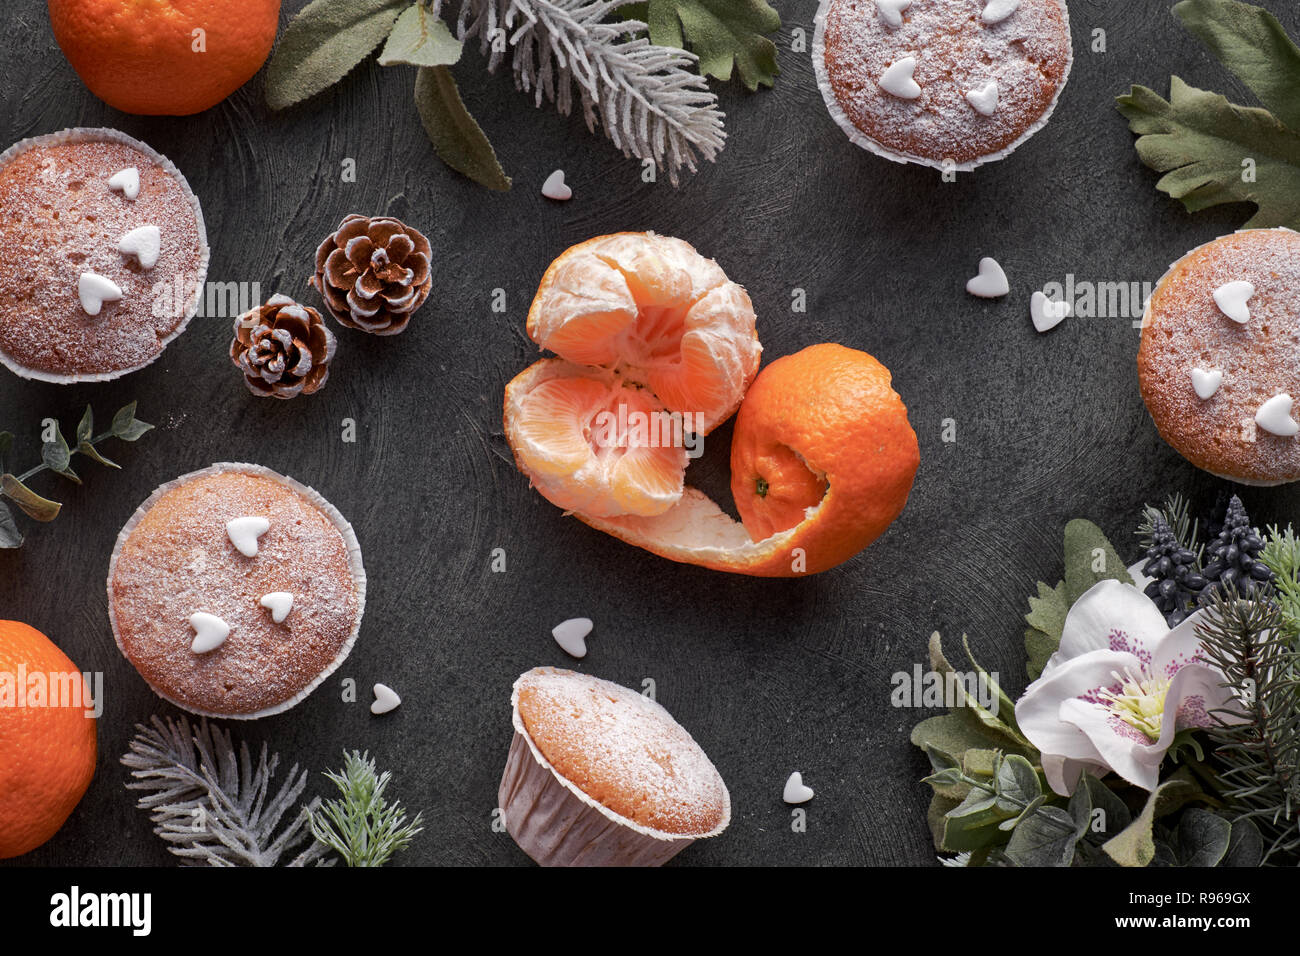 Top view of the table with satsumas, sugar-sprinkled muffins and Christmas star cookies on dark textured background Stock Photo